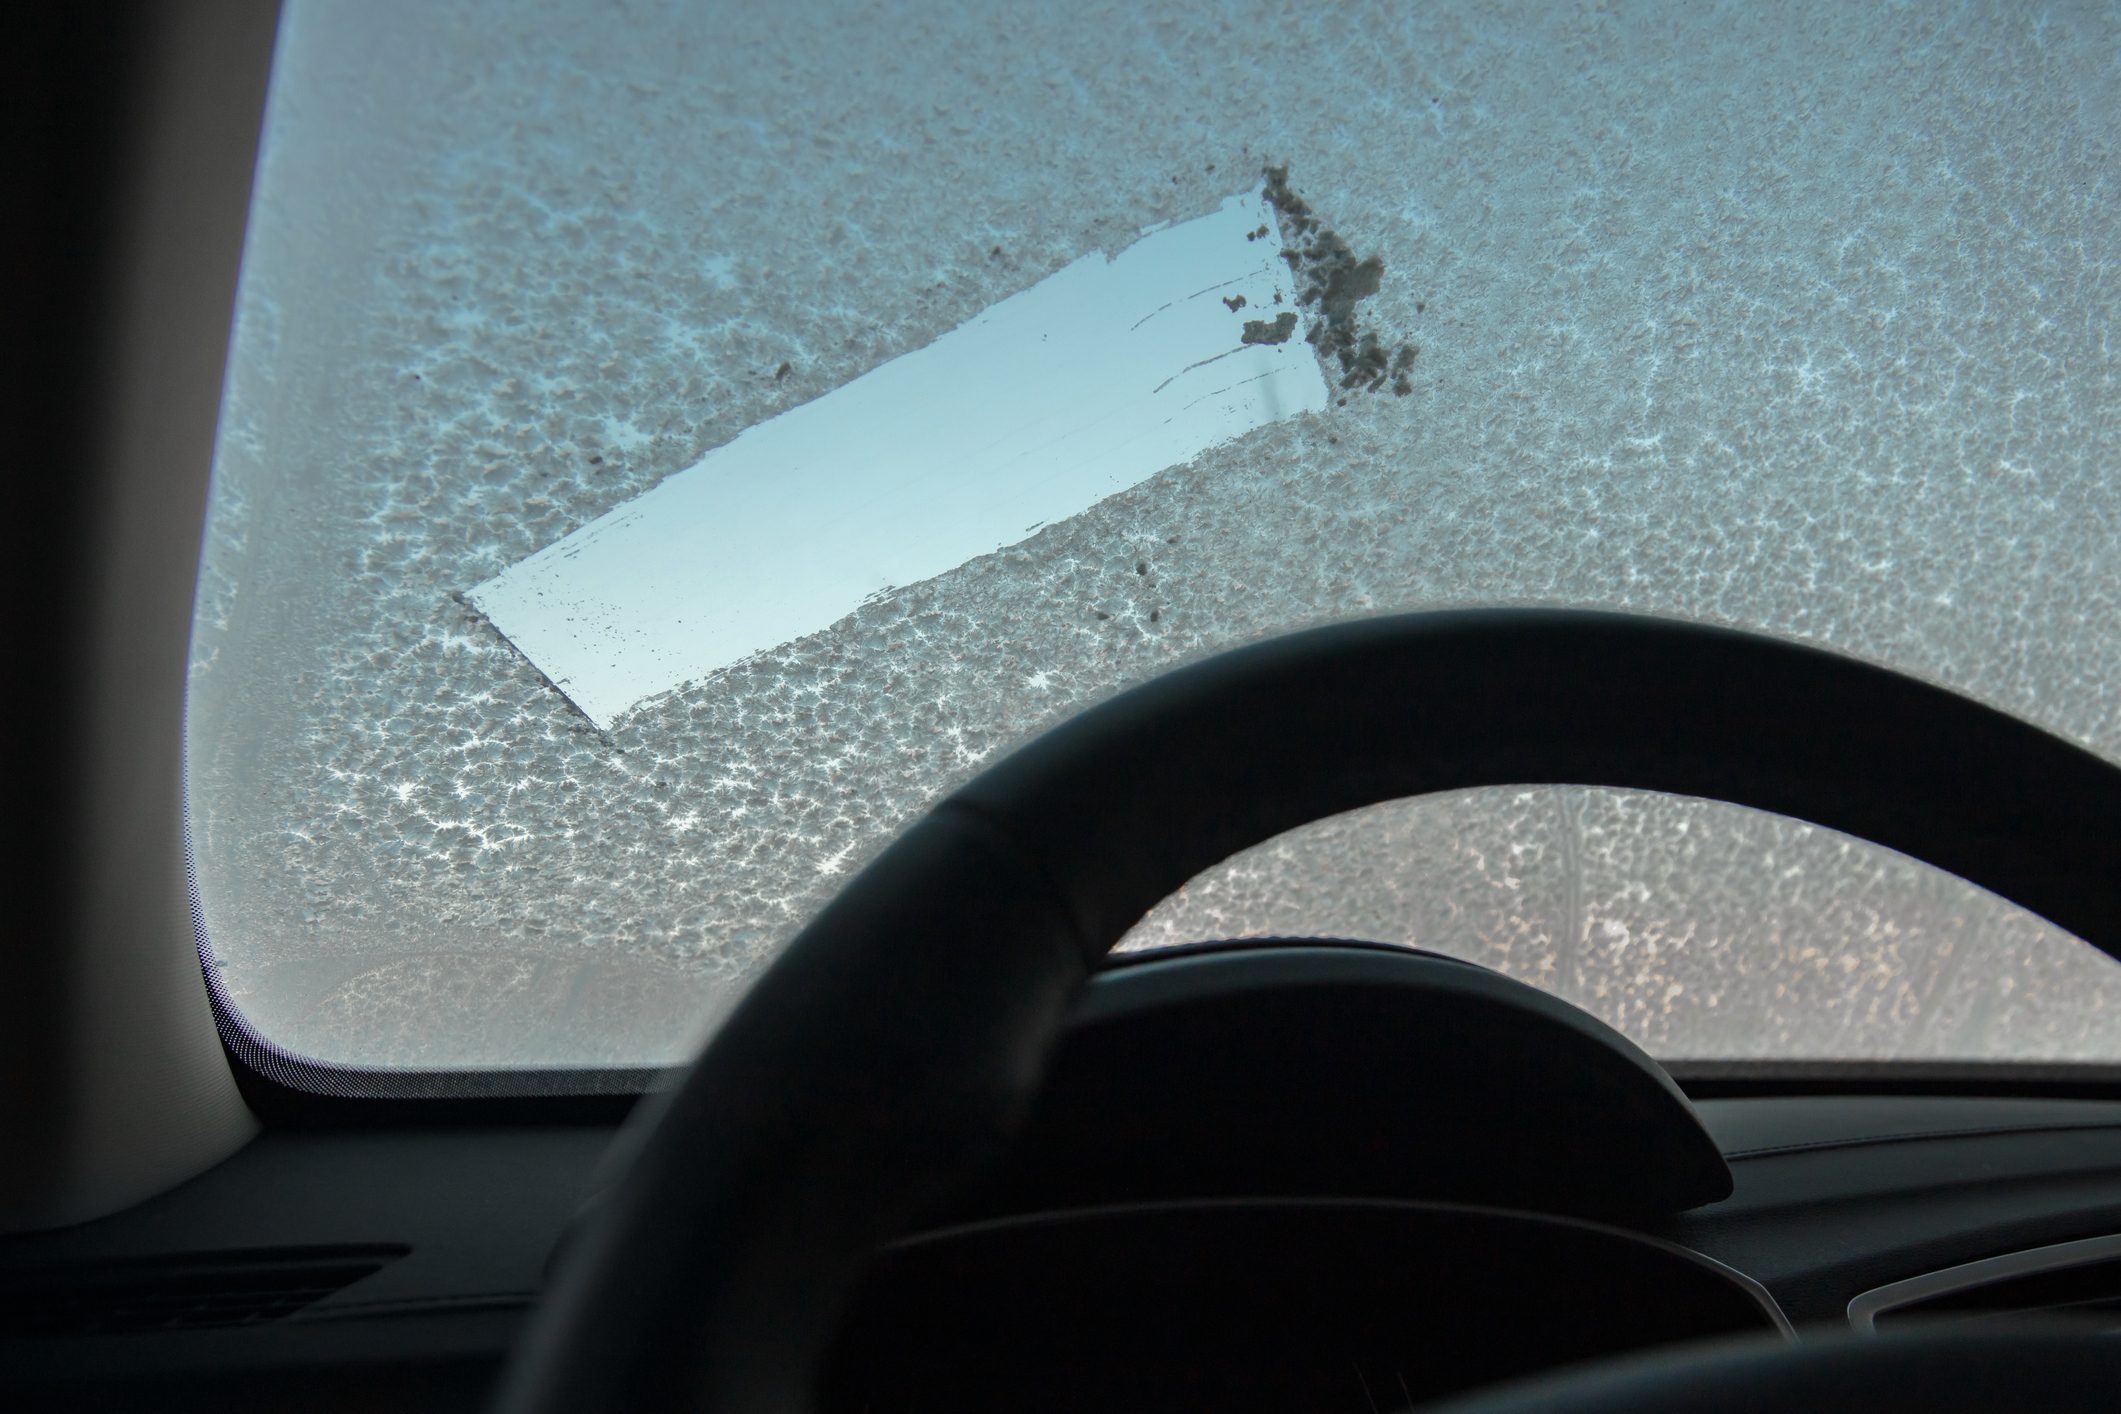 Best to de-ice your windshield? You need patience, but not vinegar